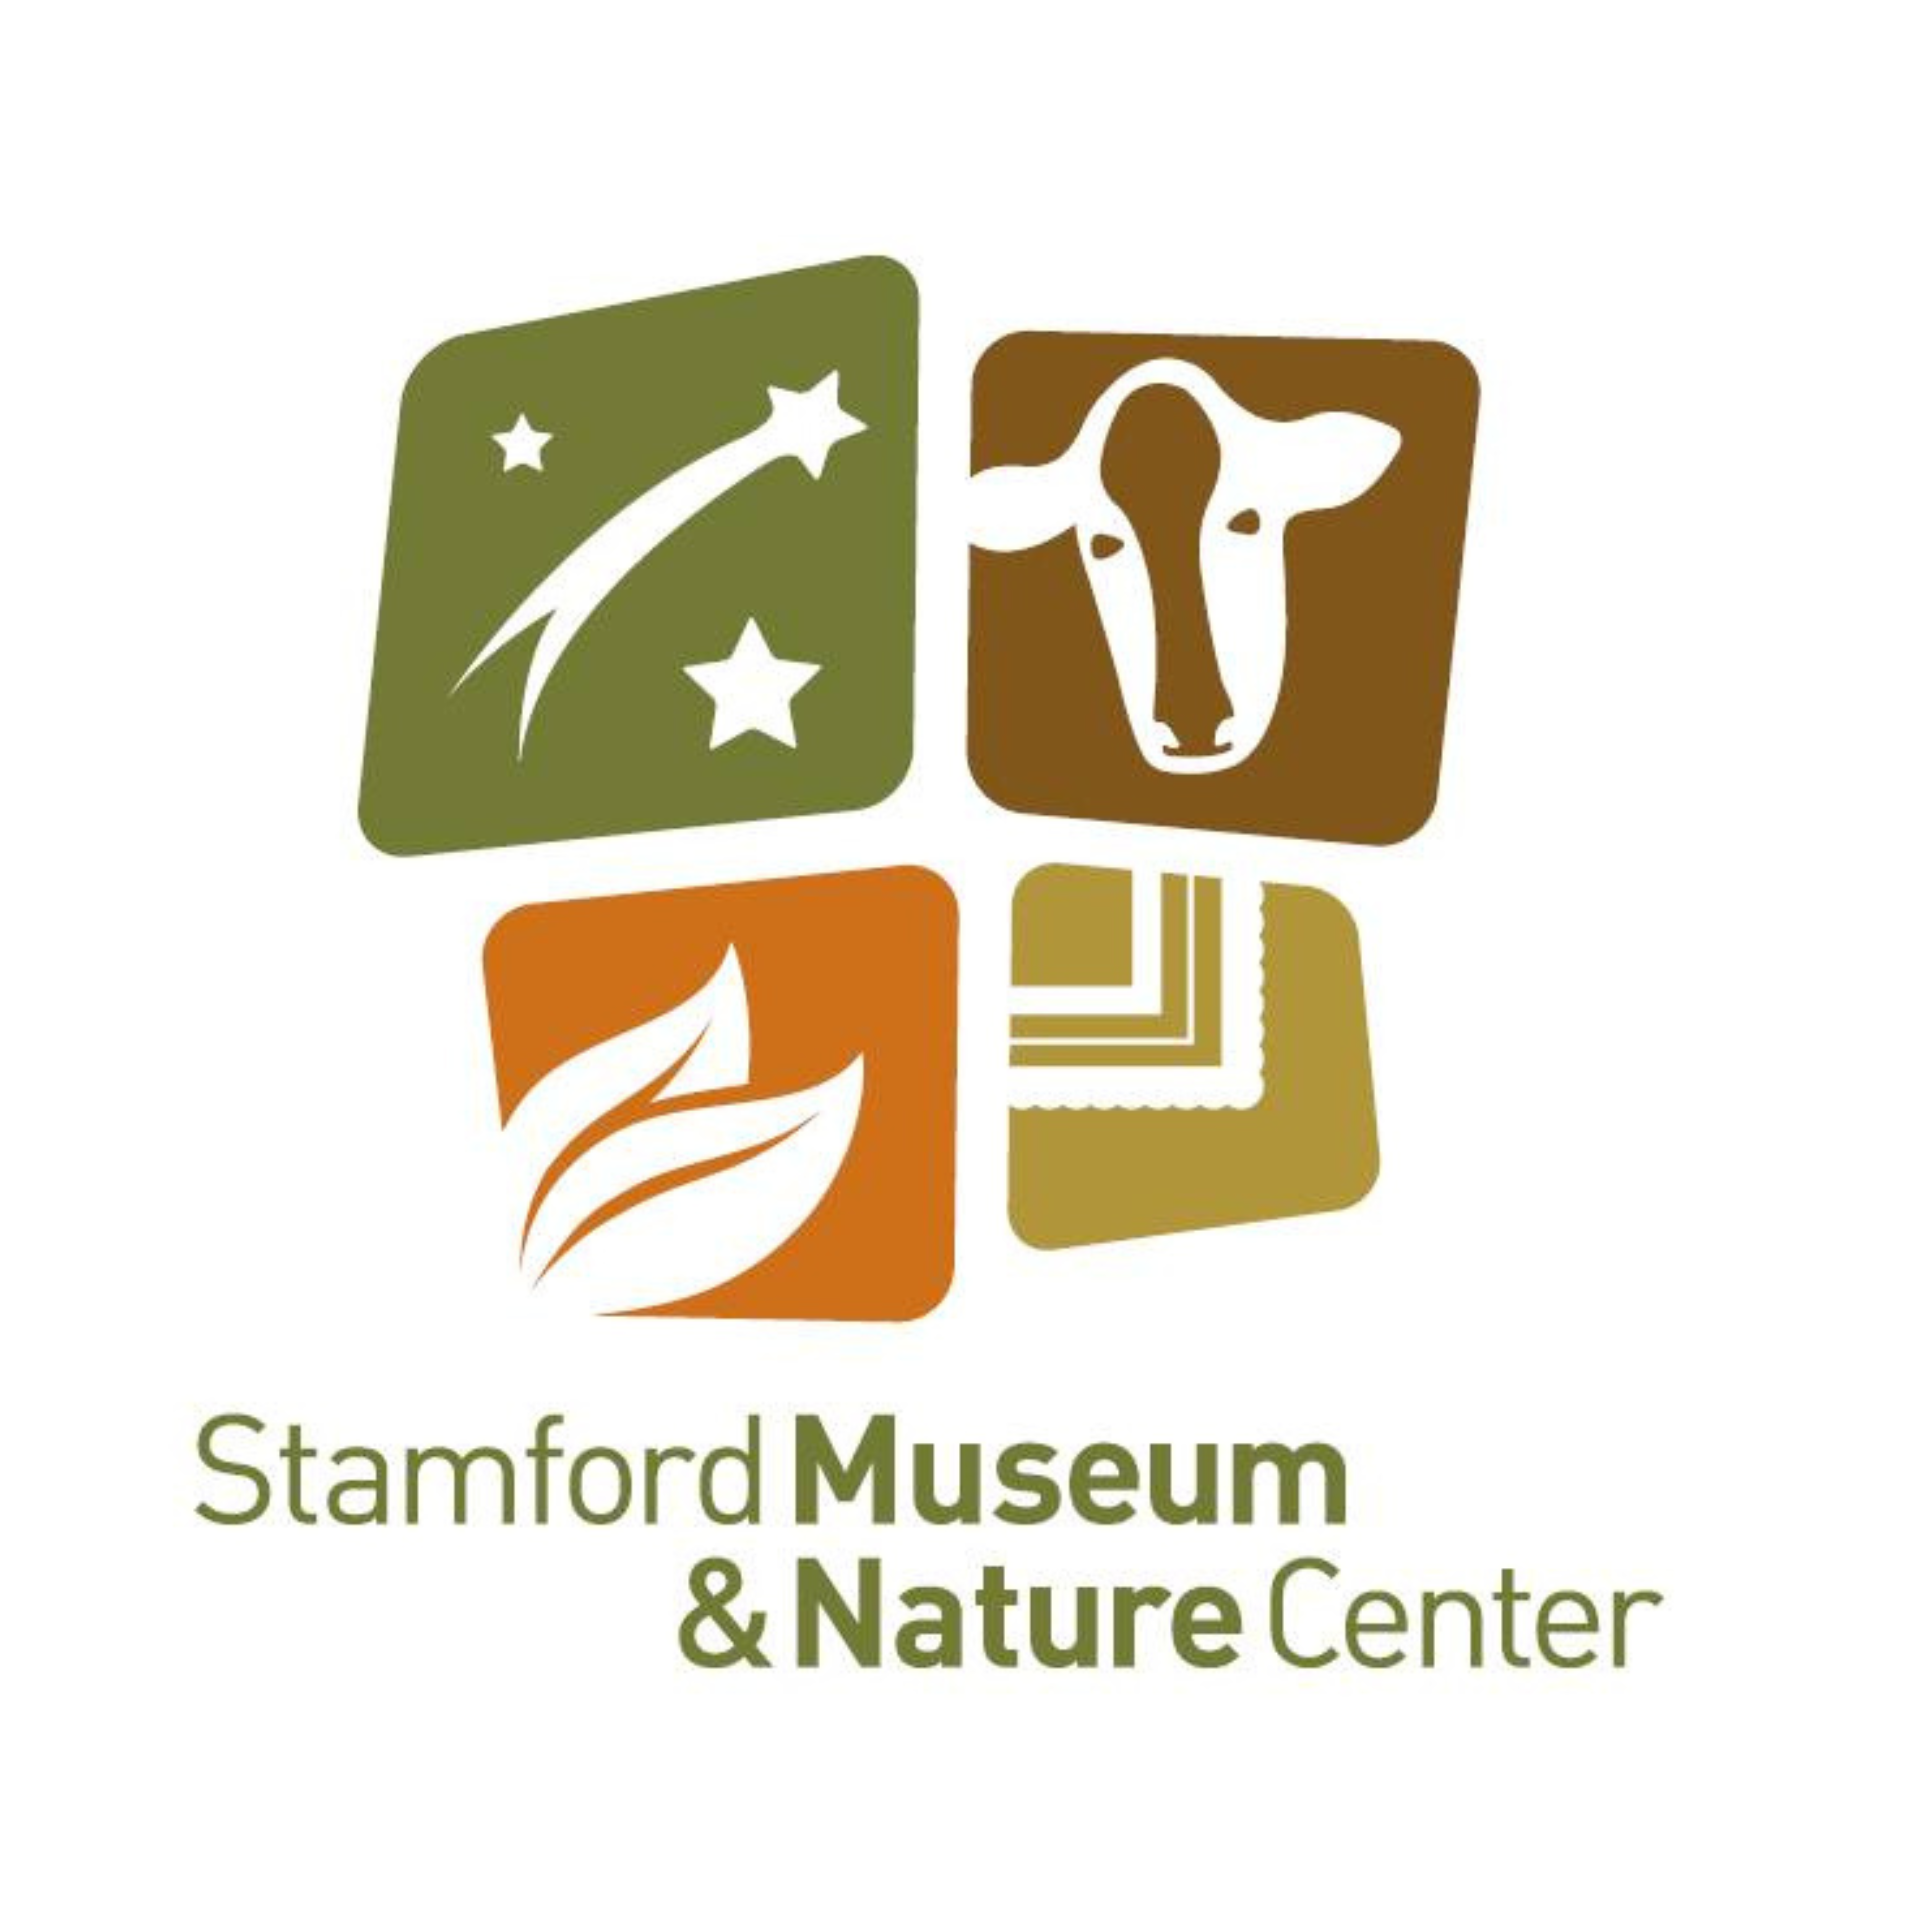 Stamford Museum and Nature Center logo.